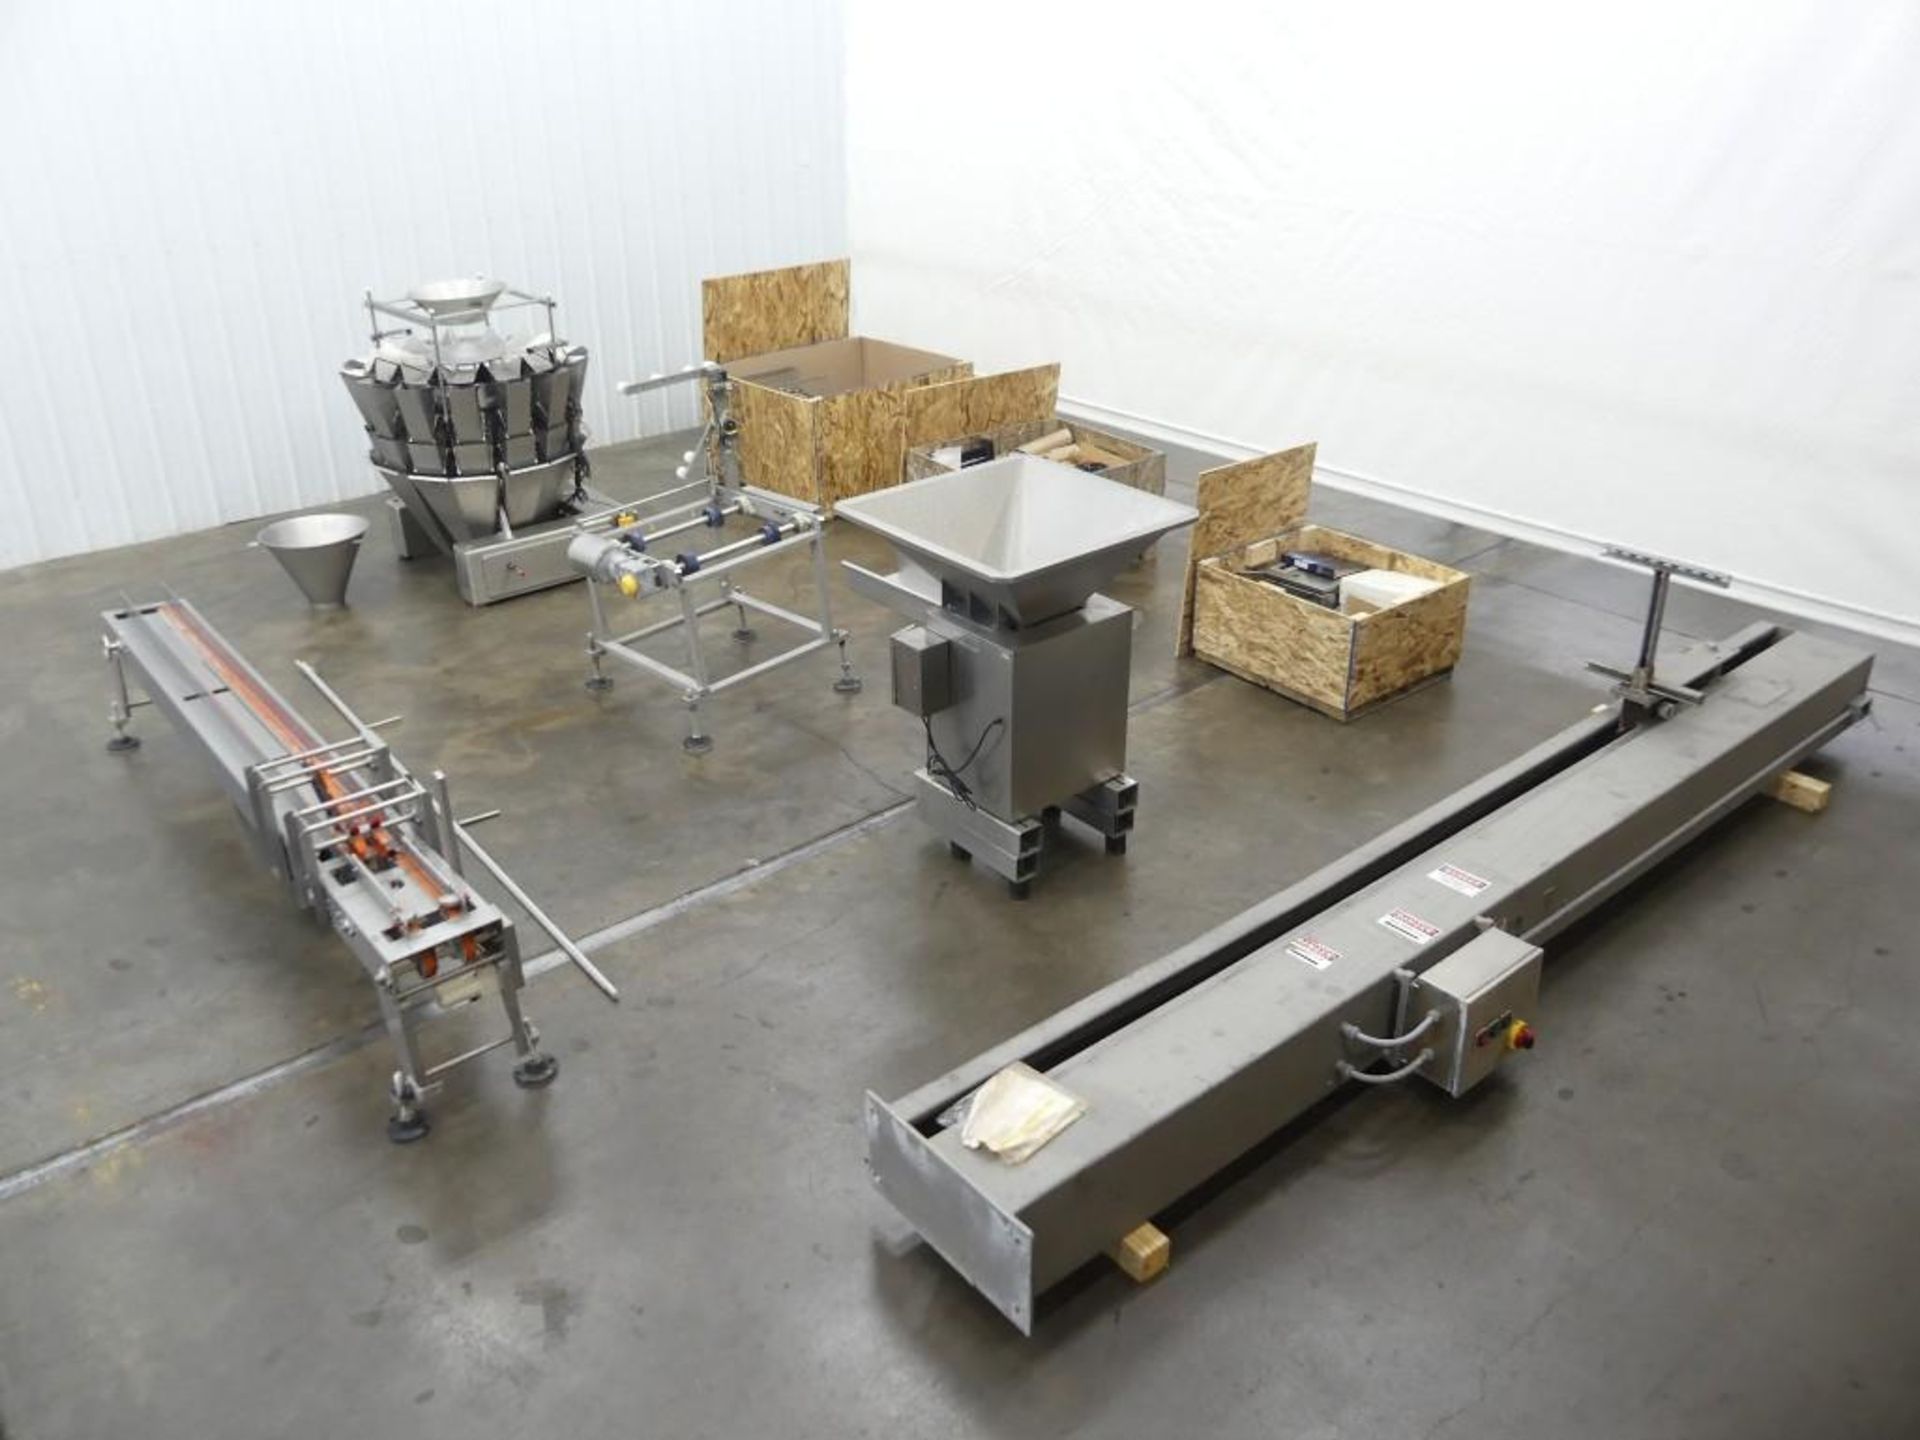 Massman HFFS-IM1000 Flexible Pouch Packaging System - Image 53 of 127